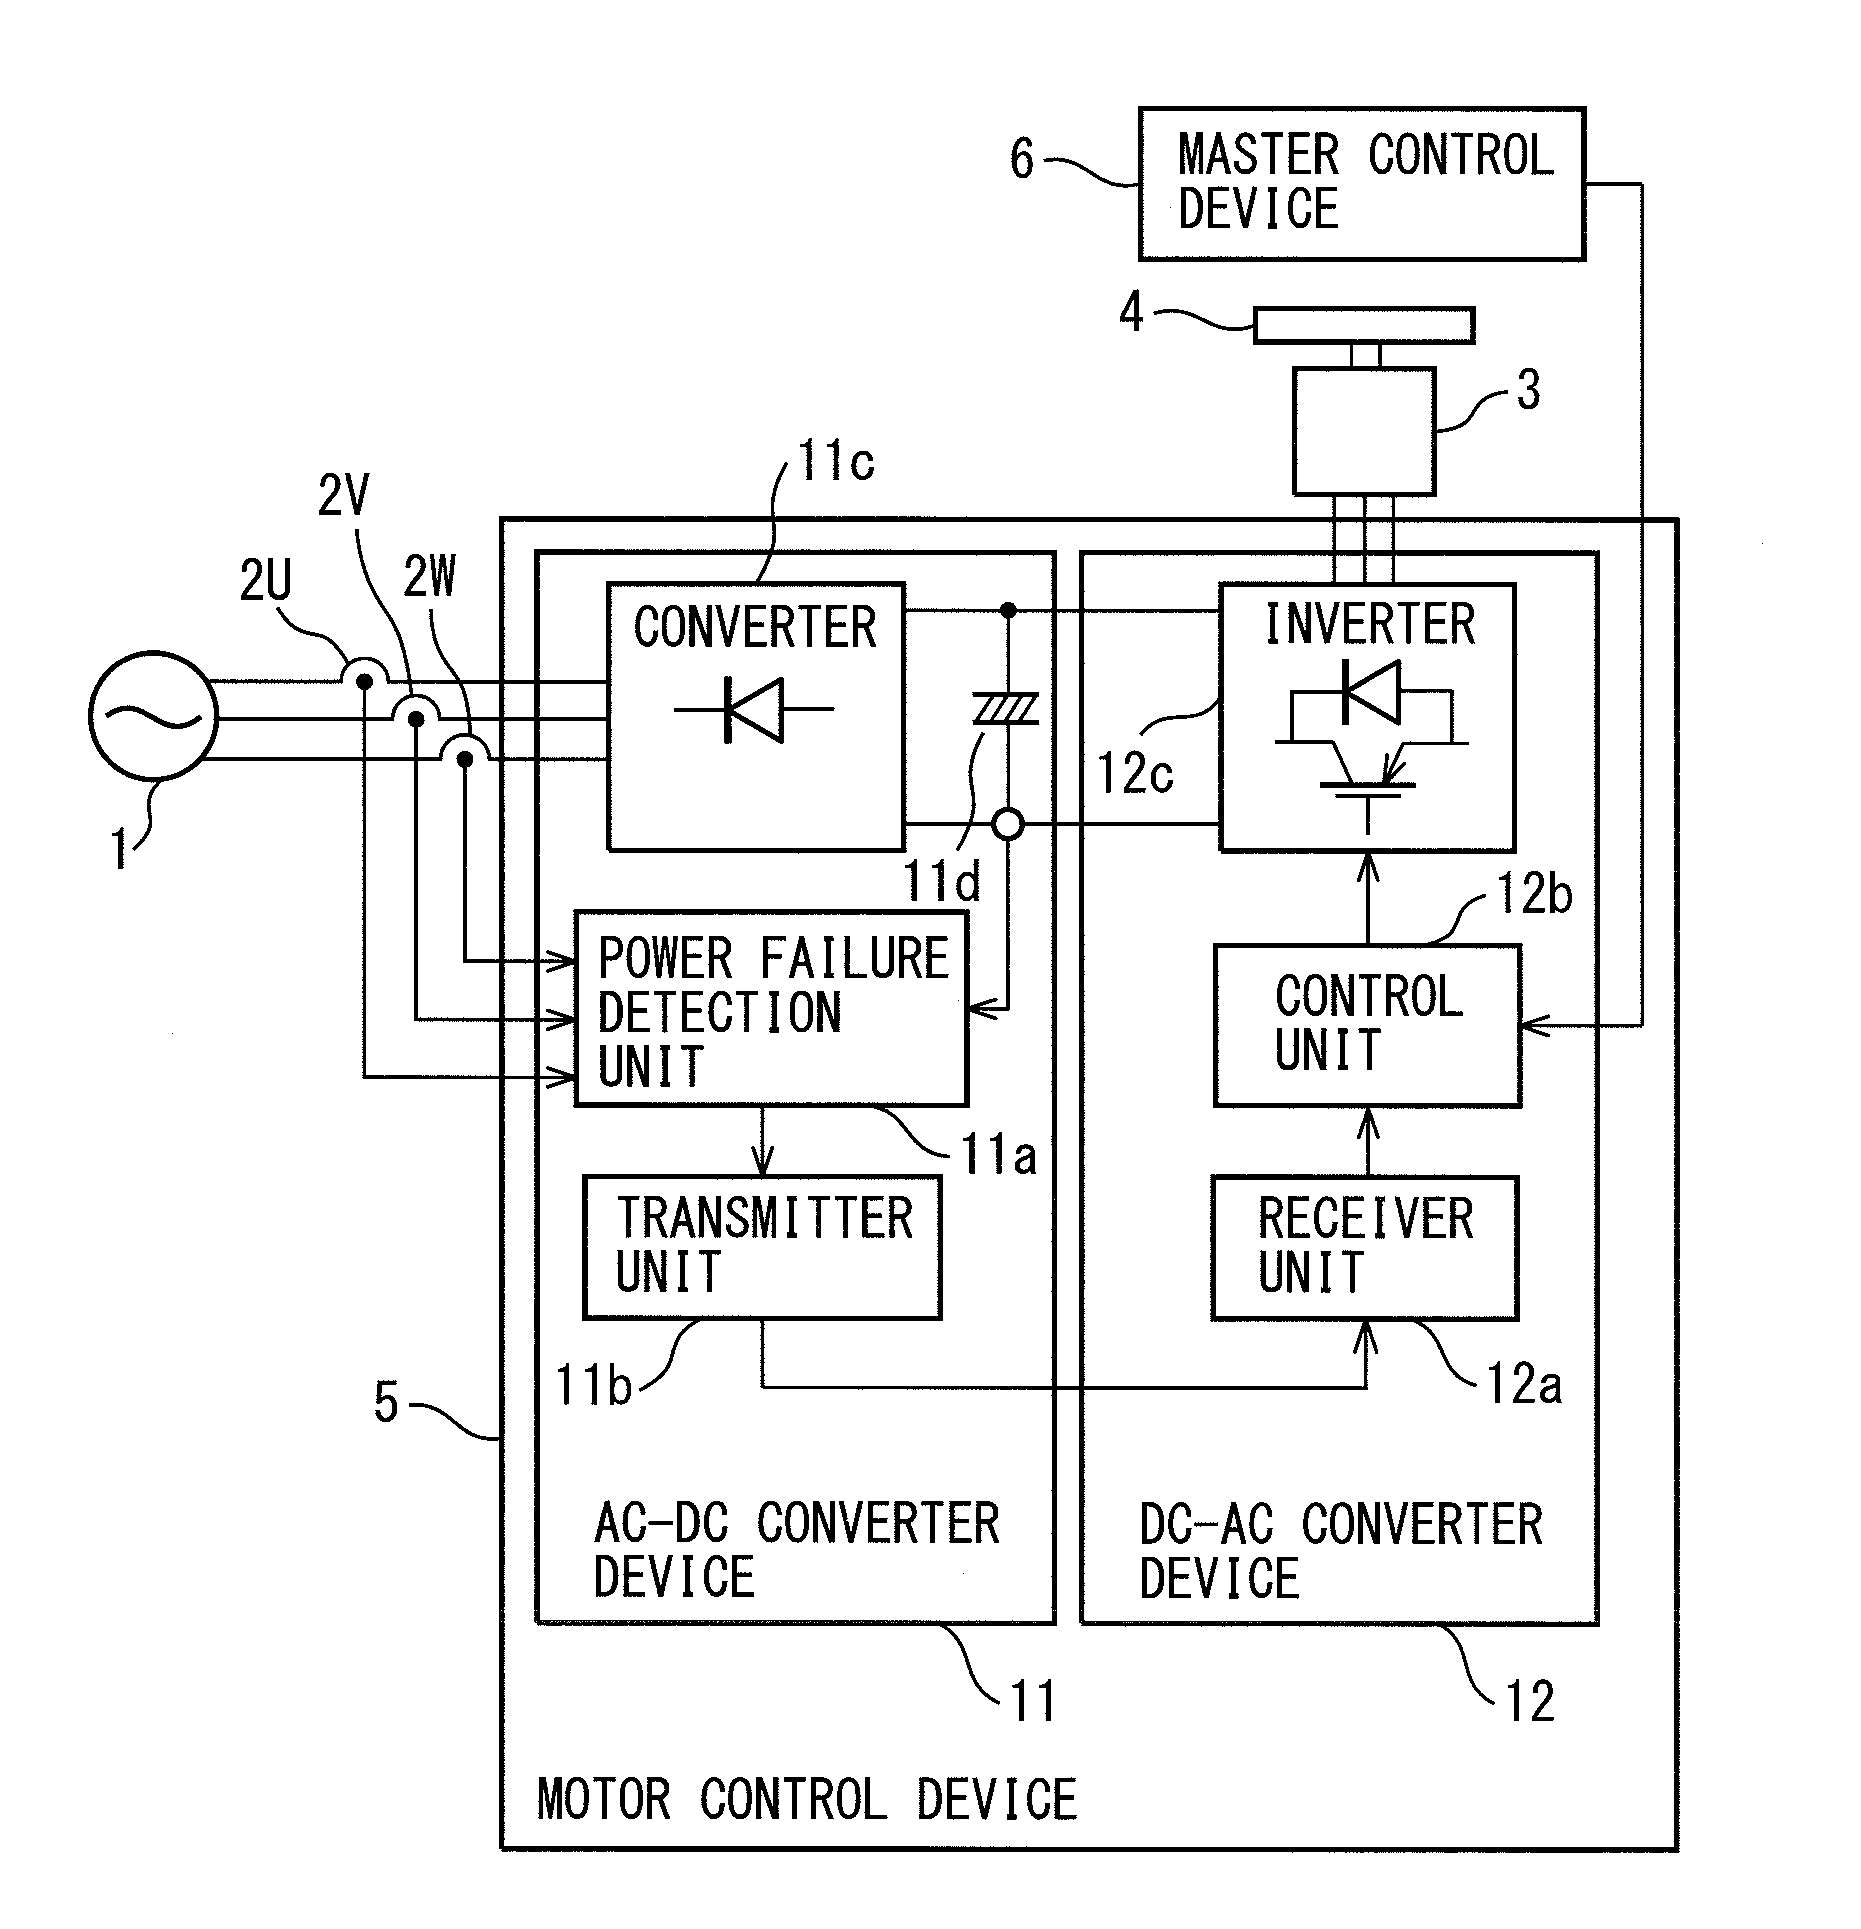 Motor control device provided with power failure management